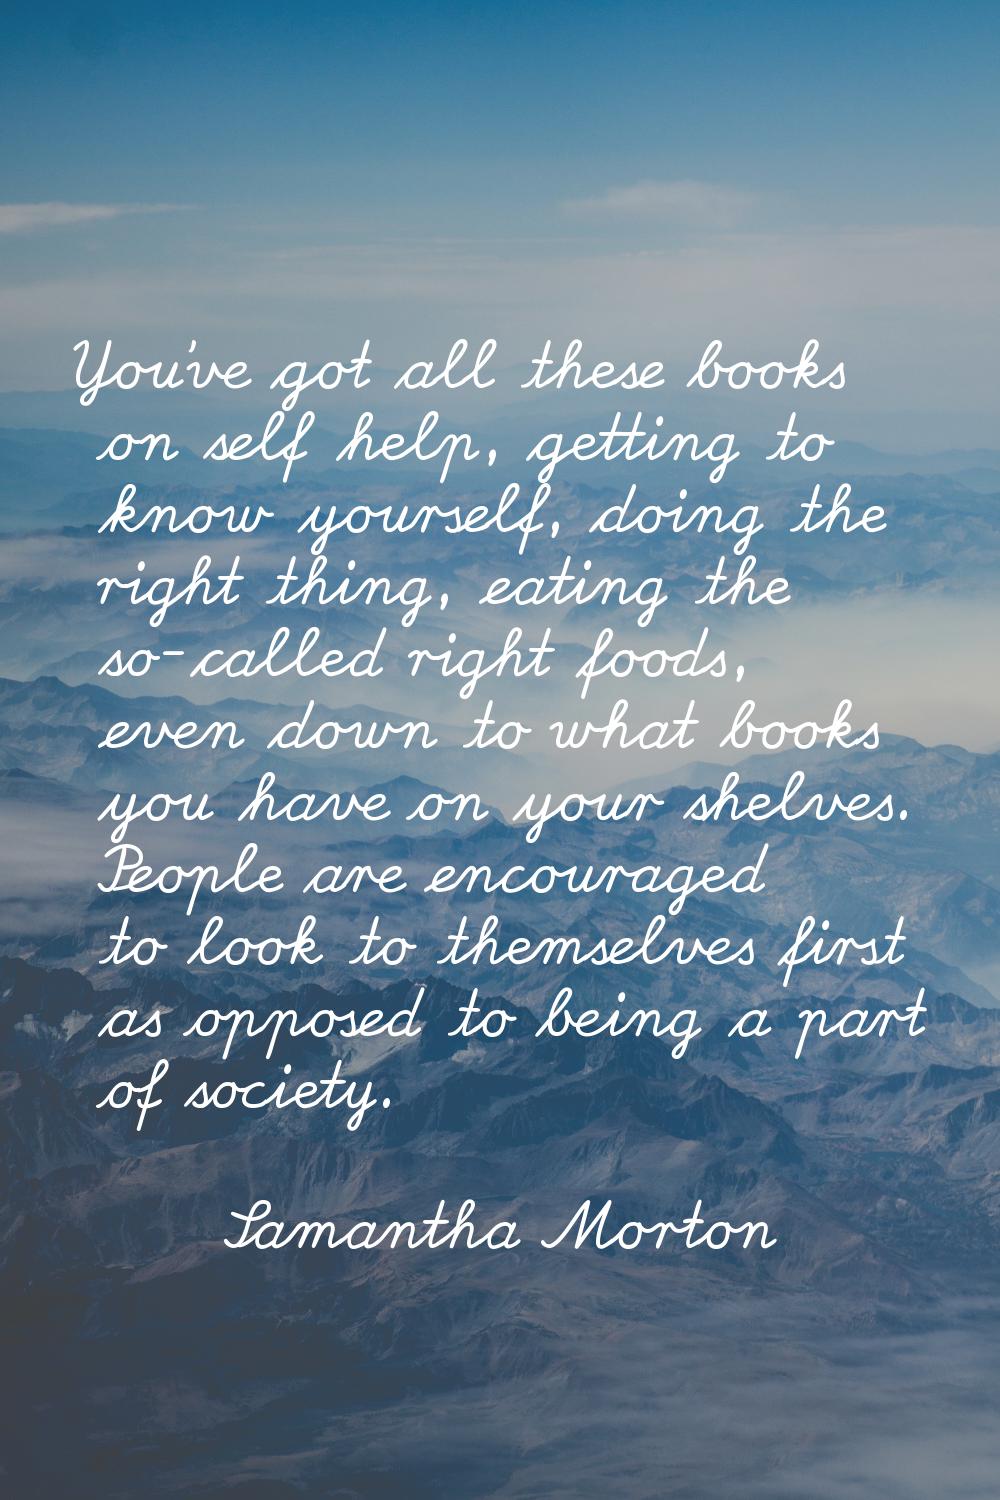 You've got all these books on self help, getting to know yourself, doing the right thing, eating th